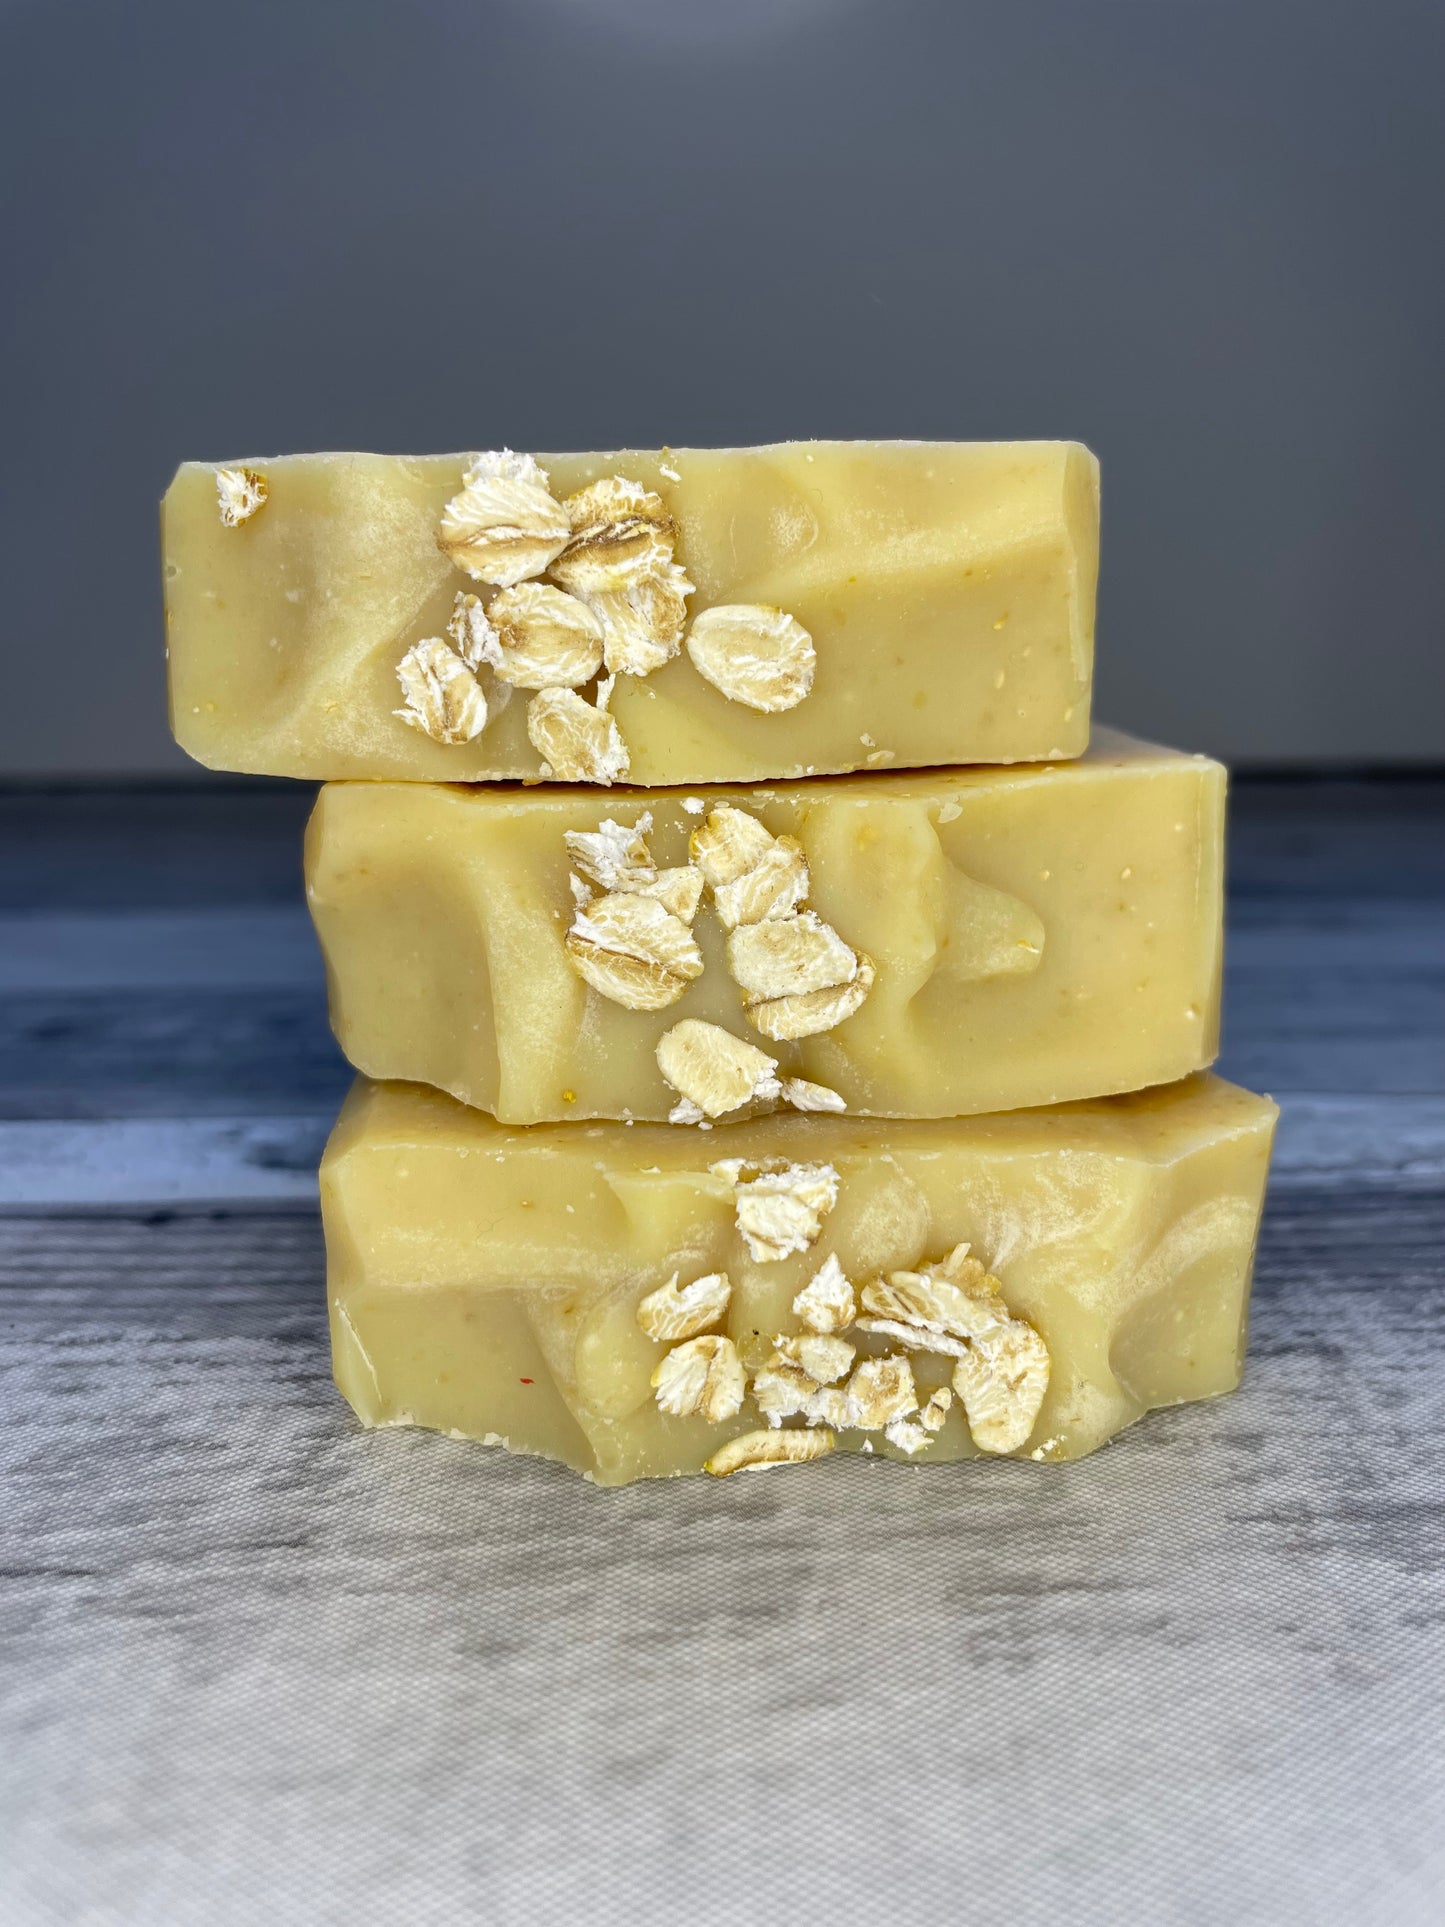 3 honey and oats soaps stacked on top of each other showing the creamy texture of the top